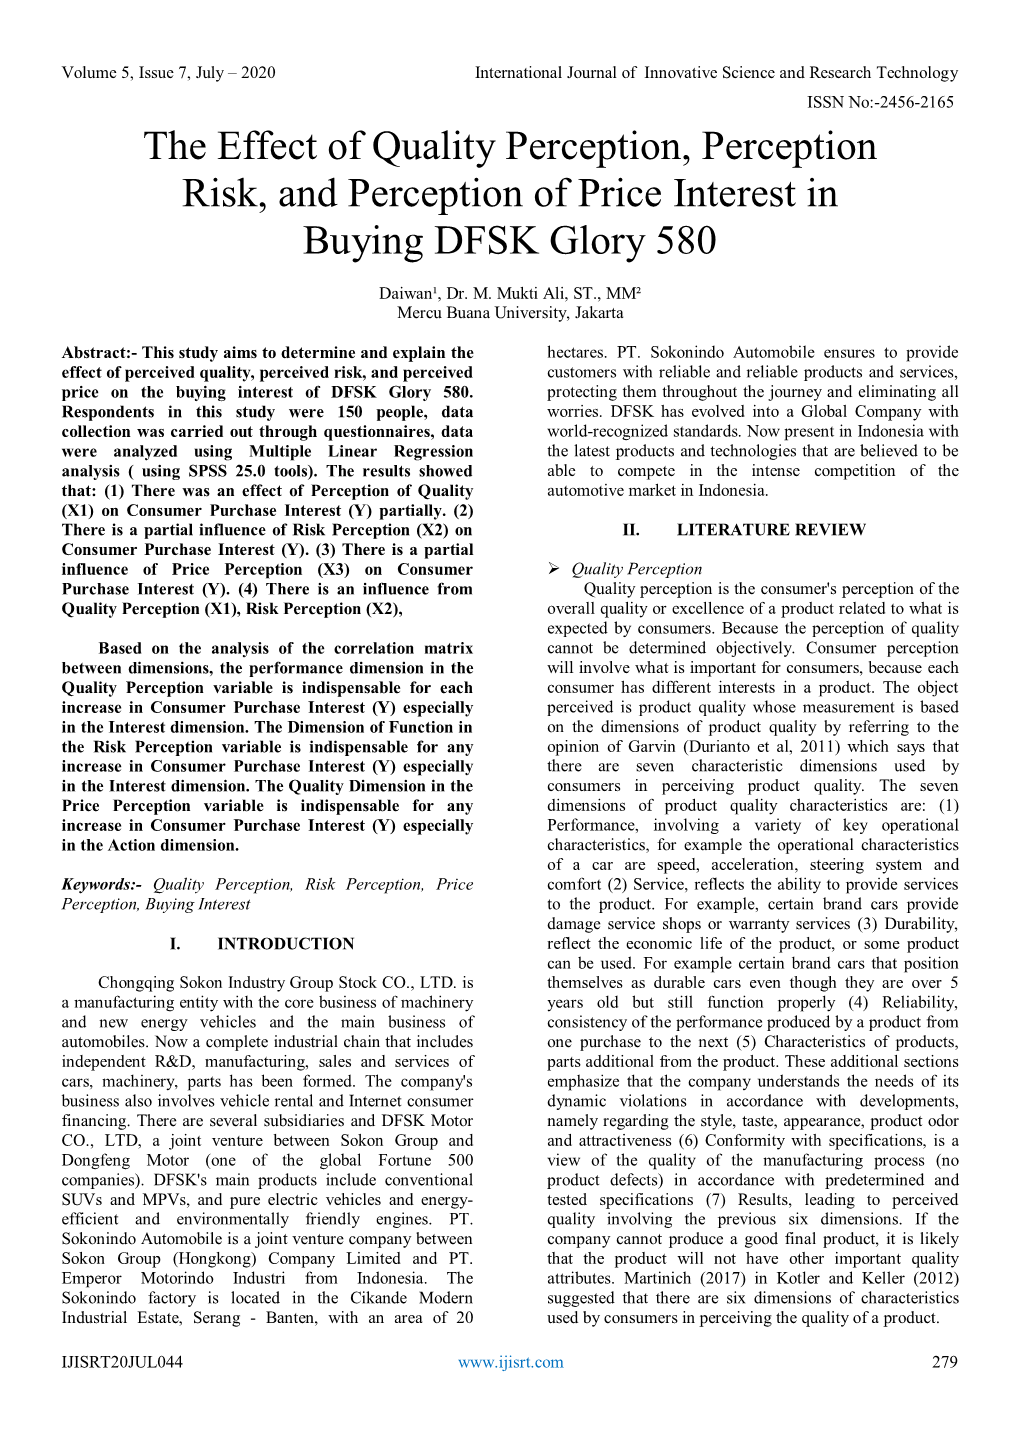 The Effect of Quality Perception, Perception Risk, and Perception of Price Interest in Buying DFSK Glory 580